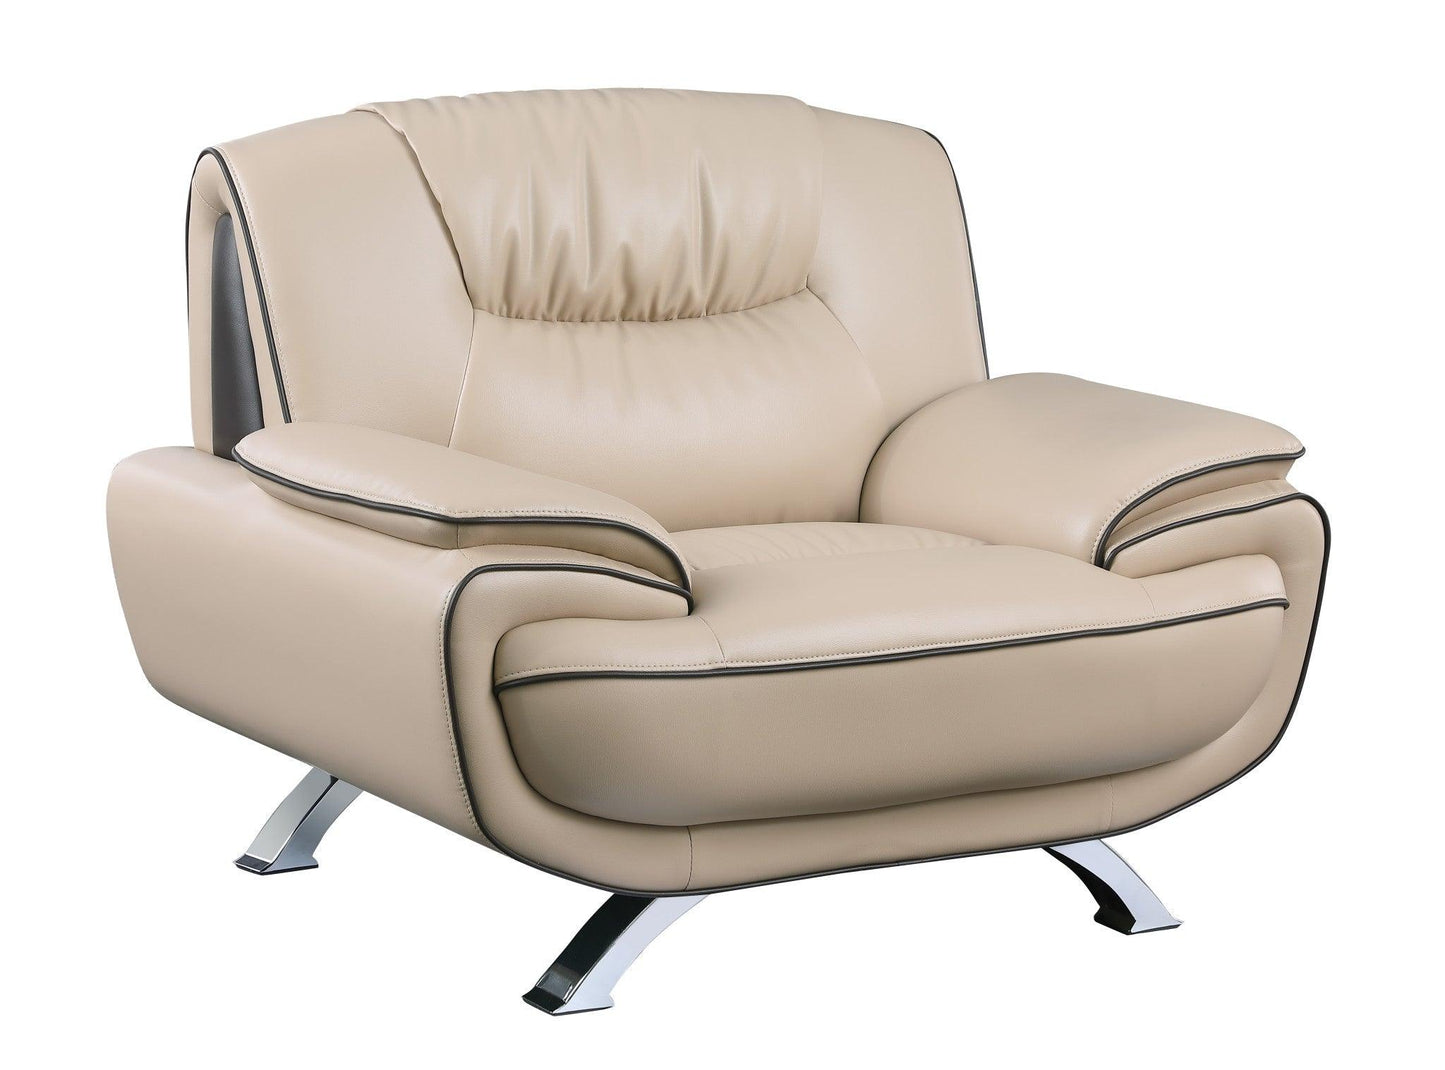 47" Beige and Silver Leather Match Arm Chair - FurniFindUSA